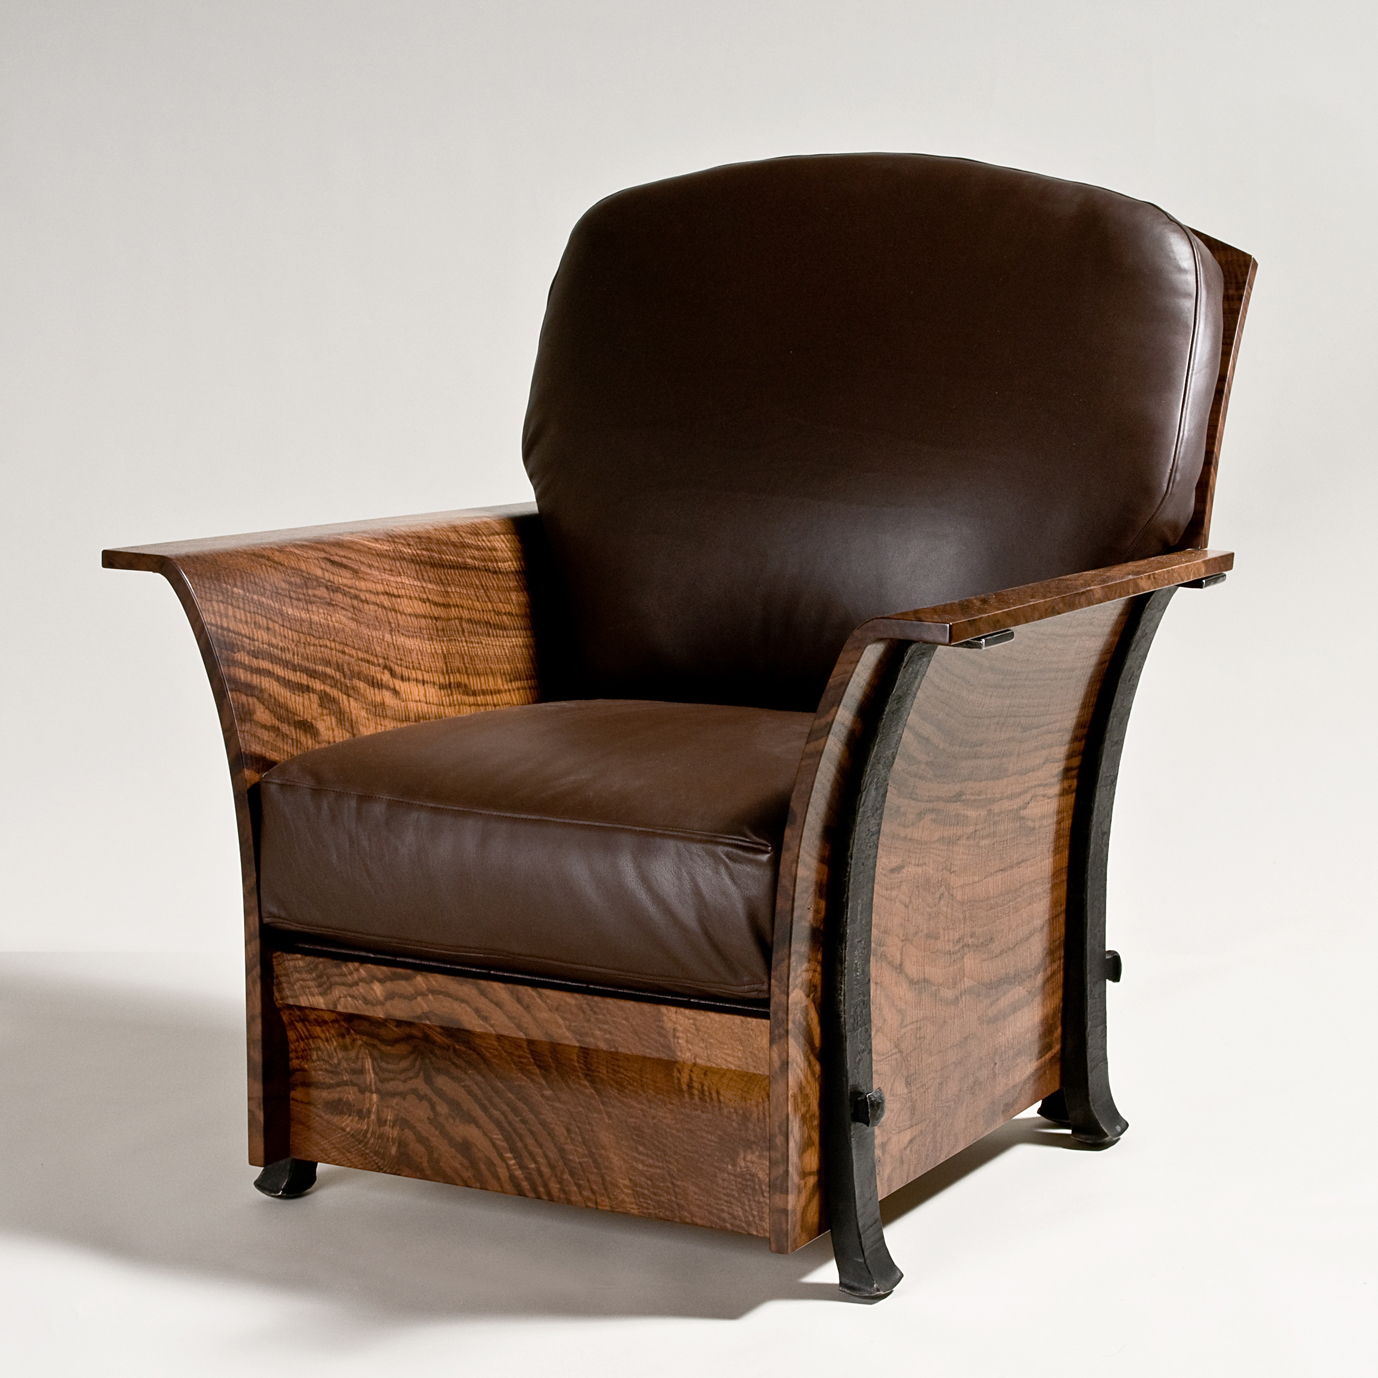 Handcrafted furniture, such as this leather and wood Claro chair by artist Rob Hare, is on display at the Western Design Conference Exhibit + Sale in Jackson Hole (photo by Chris Kendall).